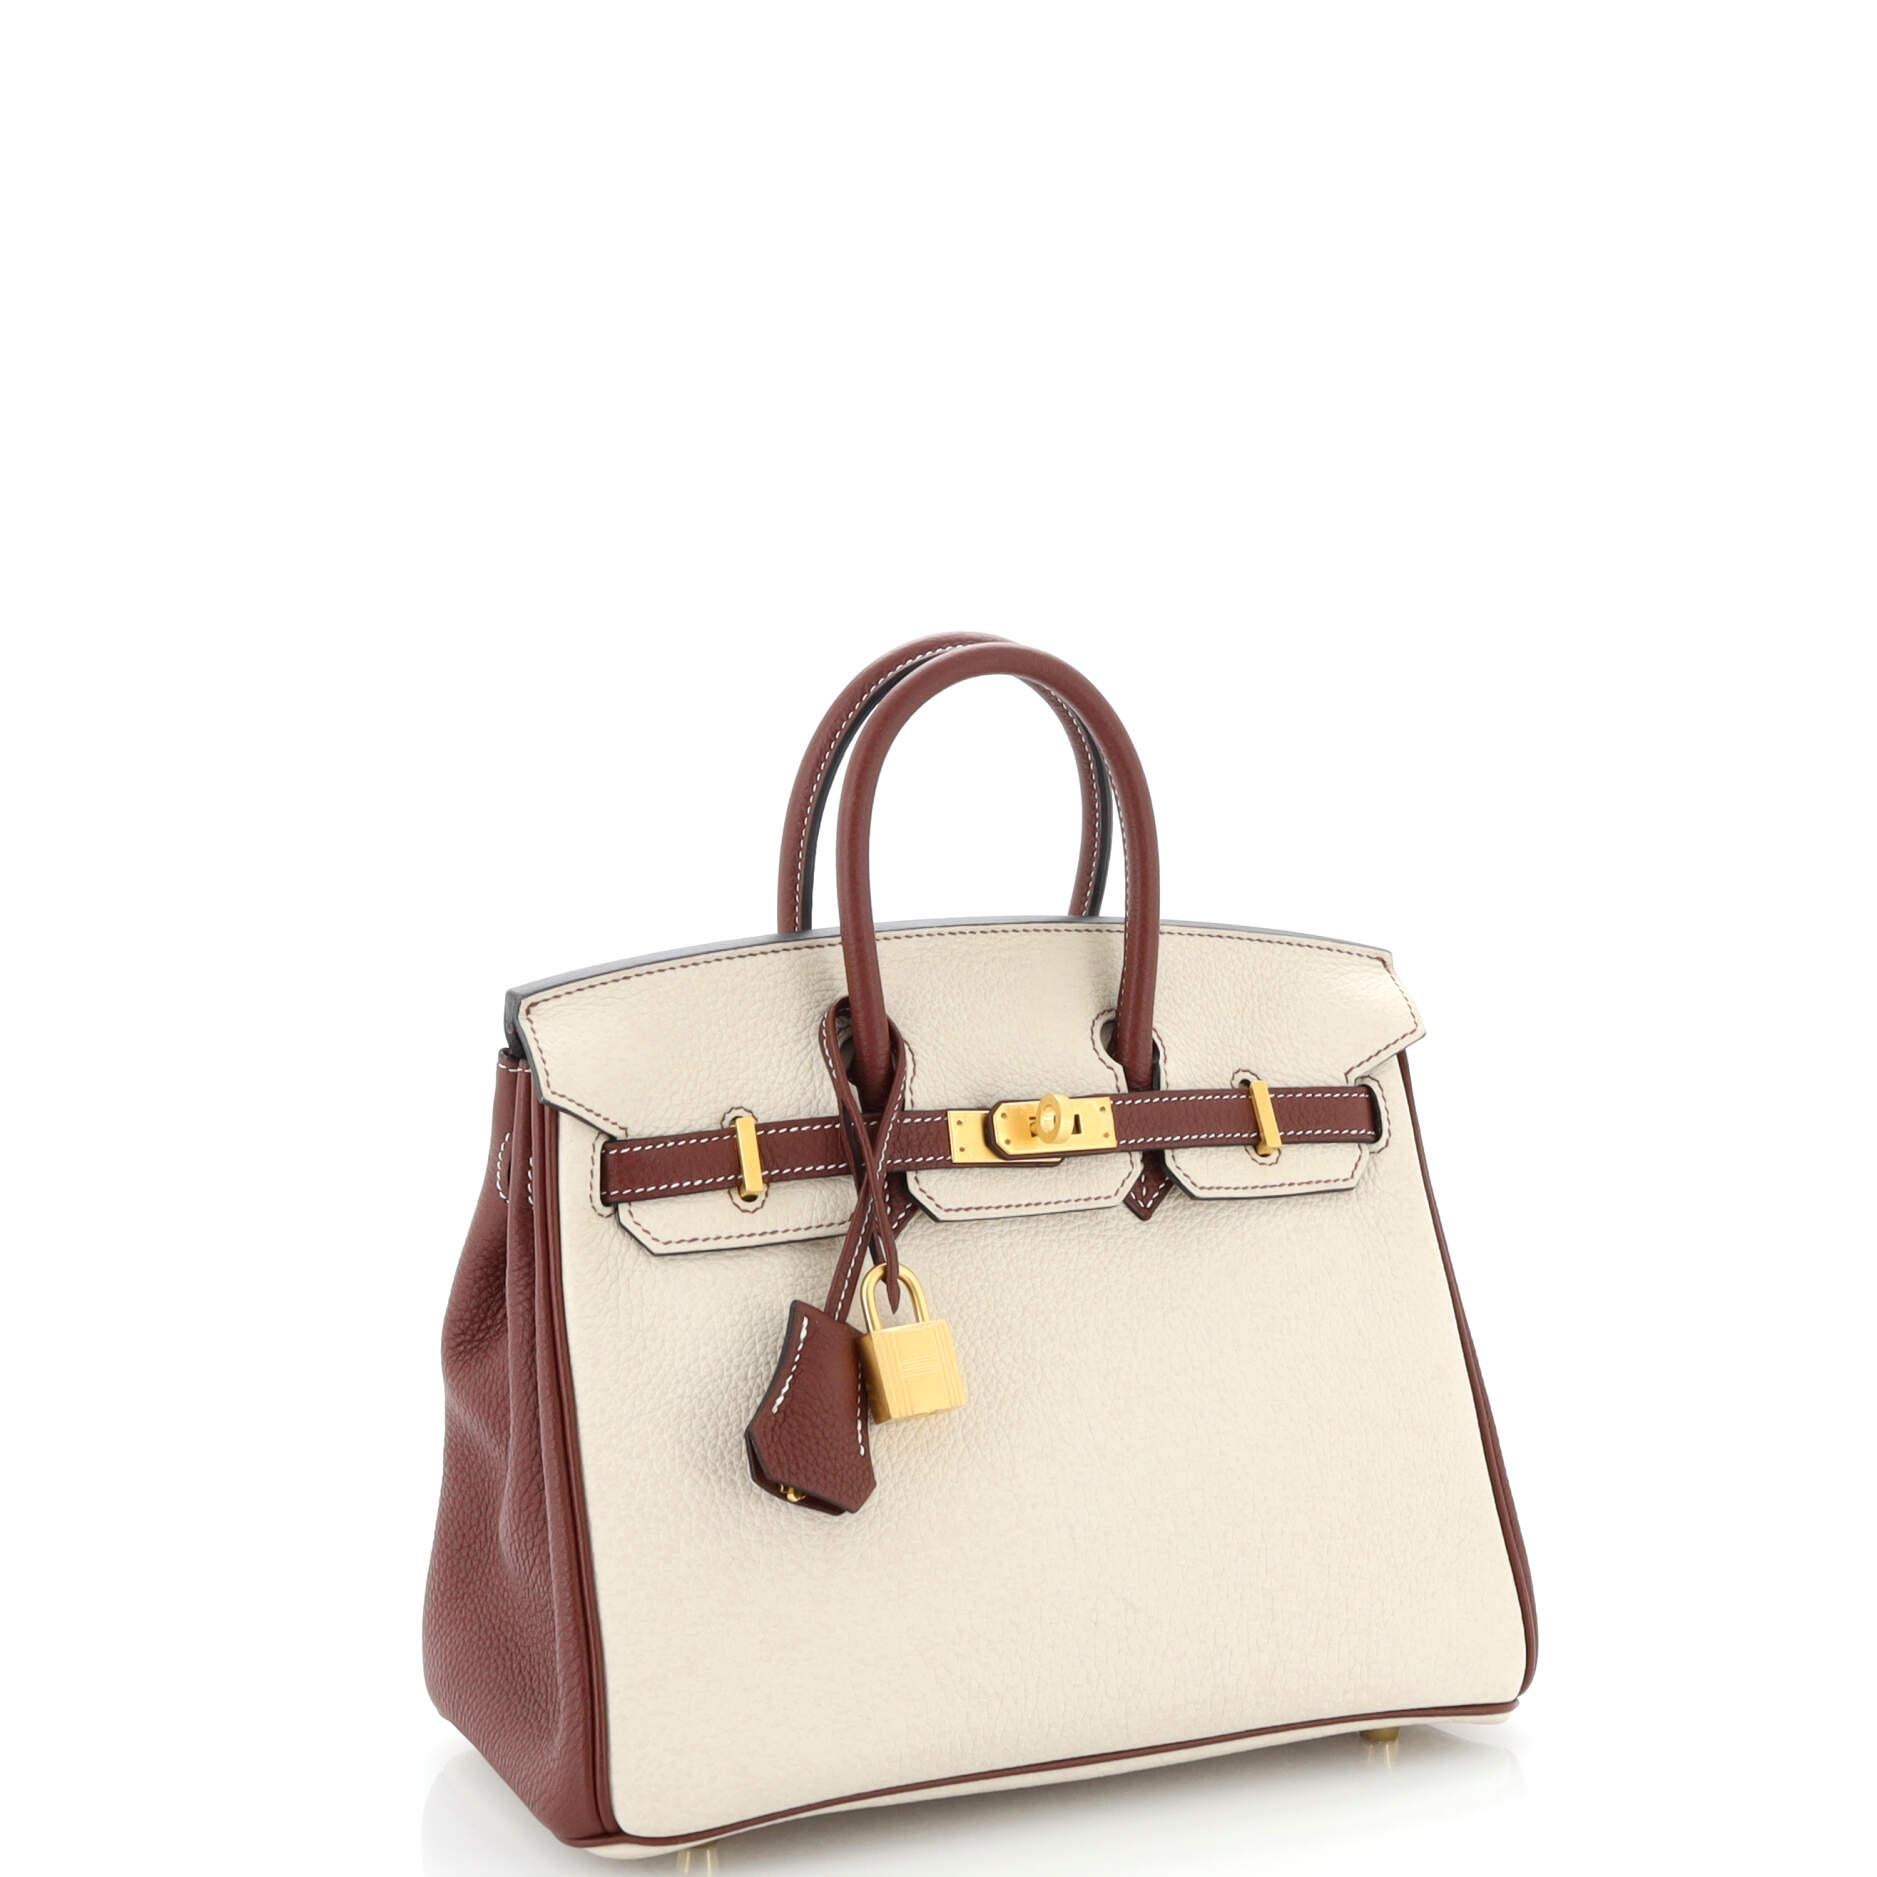 Hermes Birkin Handbag Bicolor Clemence with Brushed Gold Hardware 25 In Good Condition For Sale In NY, NY